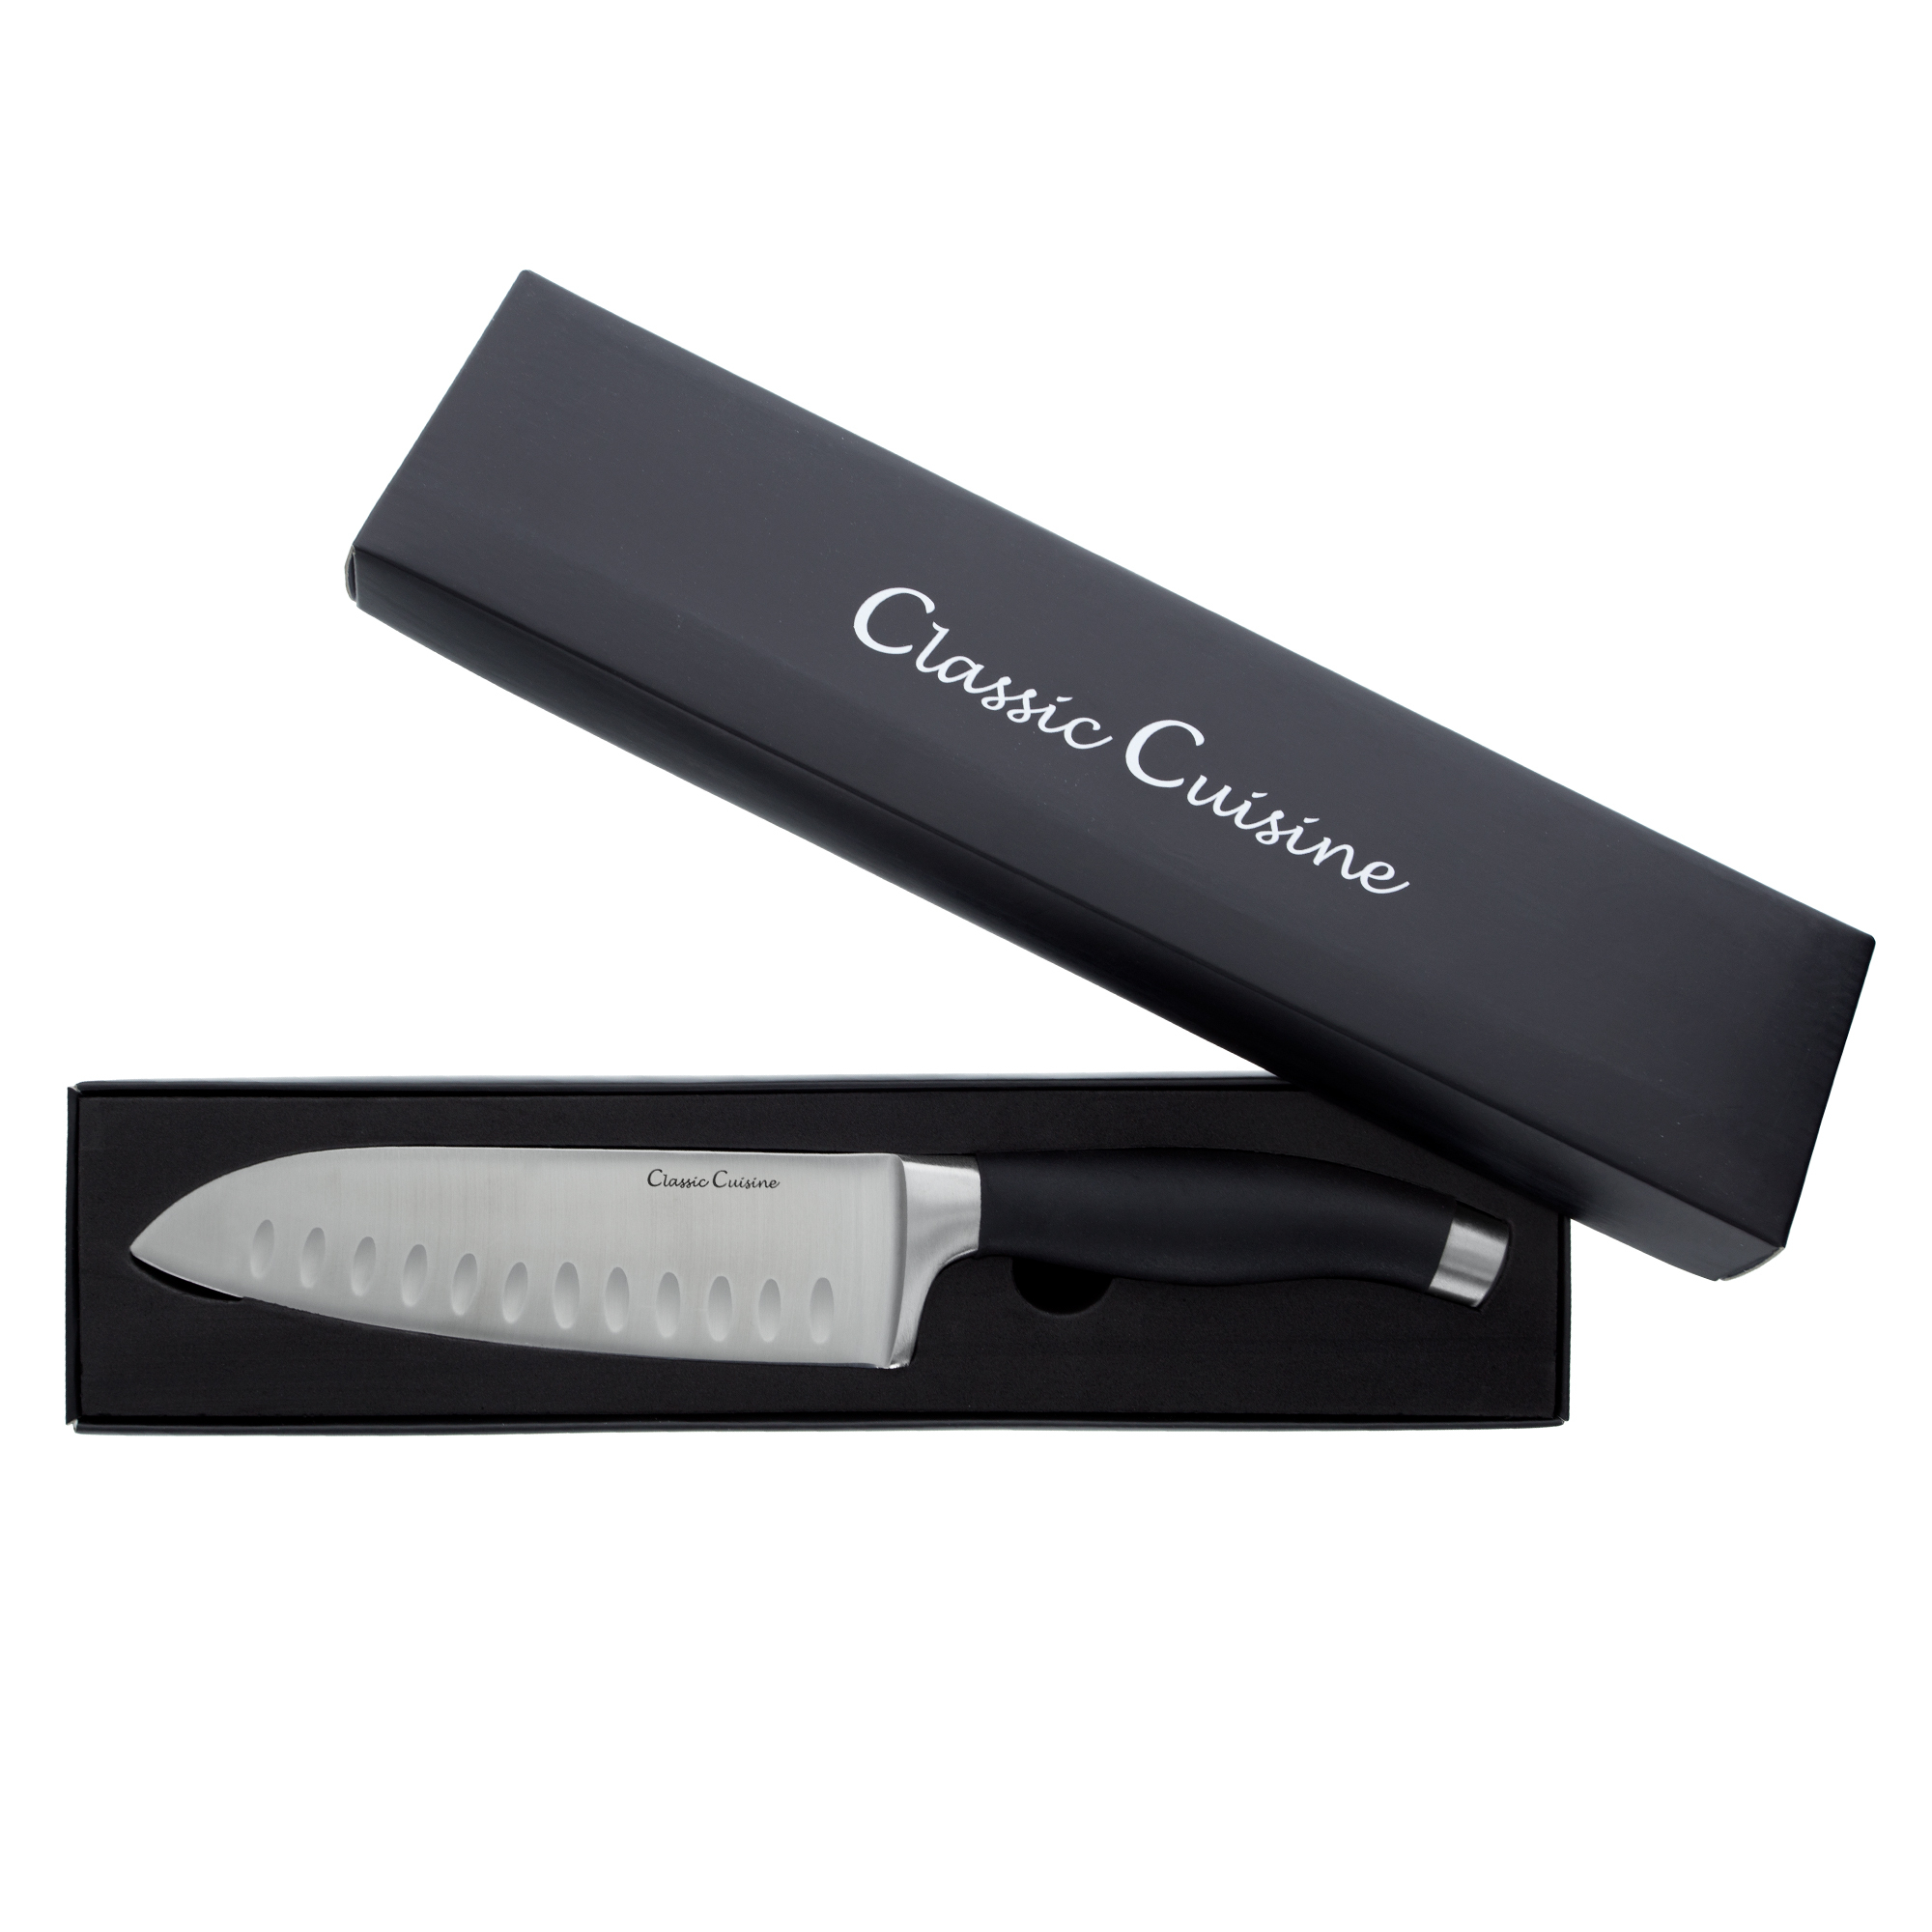 7 inch Santoku Knife Stainless Steel Hand Forged Chef Kitchen Knife for Home Cooking or Restaurant by Classic Cuisine